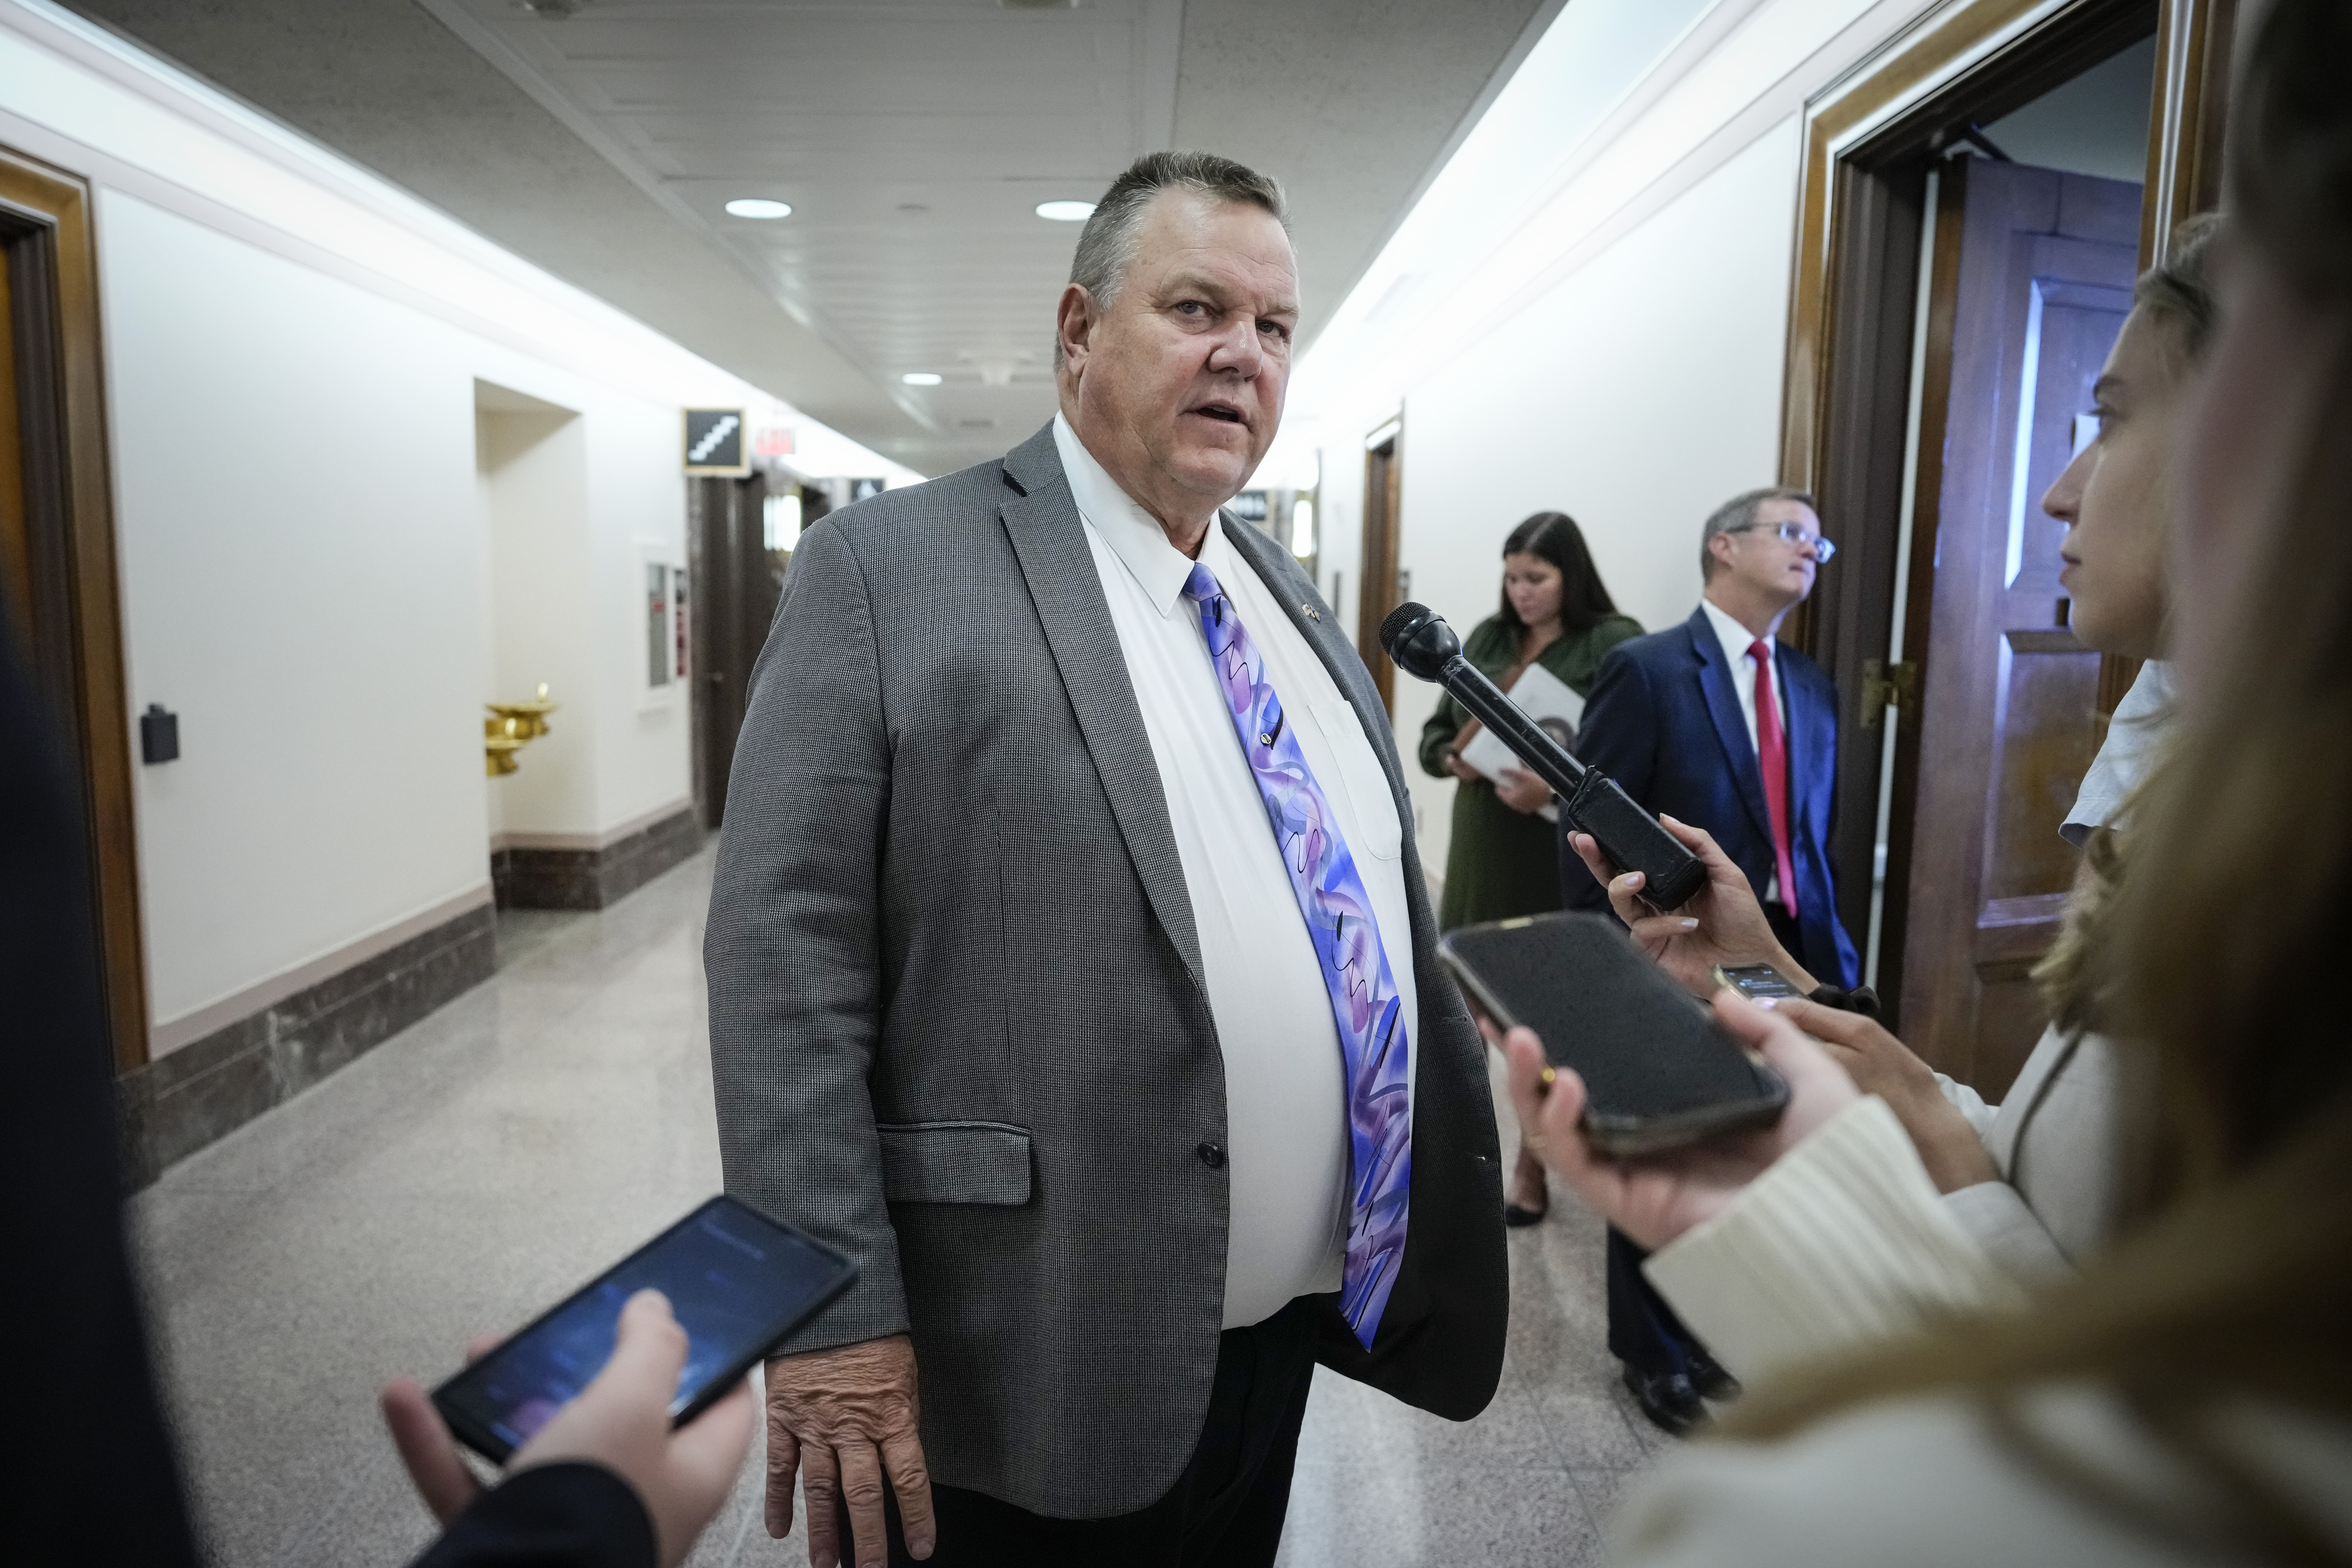 WASHINGTON, DC - SEPTEMBER 12: Sen. Jon Tester (D-MT) speaks with reporters after leaving a Senate Banking Committee hearing on Capitol Hill September 12, 2023 in Washington, DC. The hearing focused on oversight of the U.S. Securities and Exchange Commission. (Photo by Drew Angerer/Getty Images)